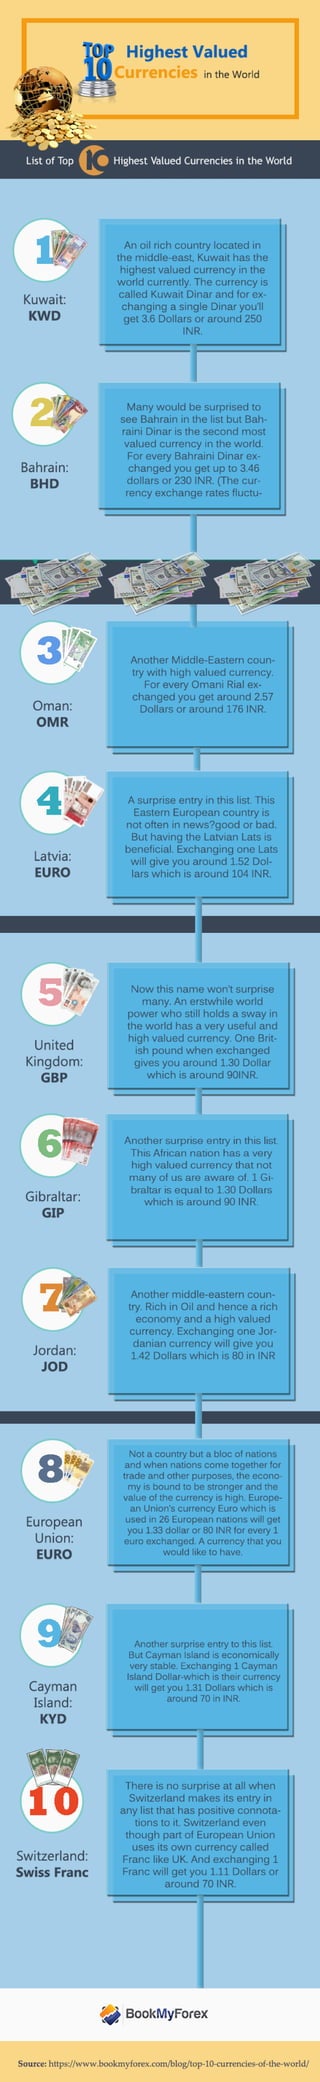 Top 10 highest valued currencies in the world